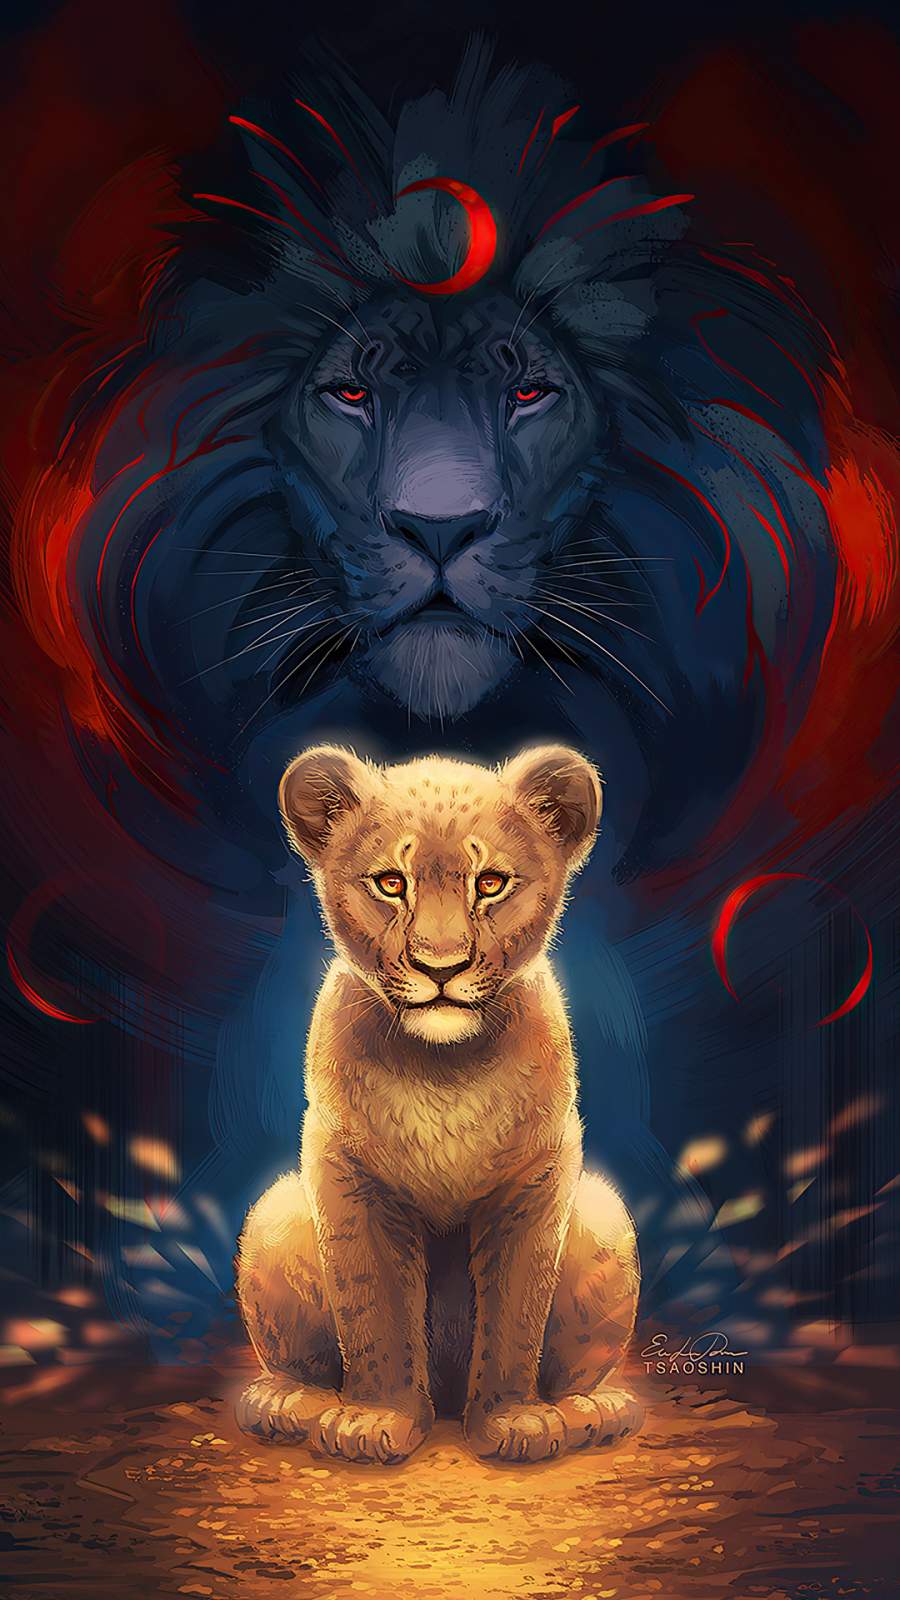 for iphone download The Lion King